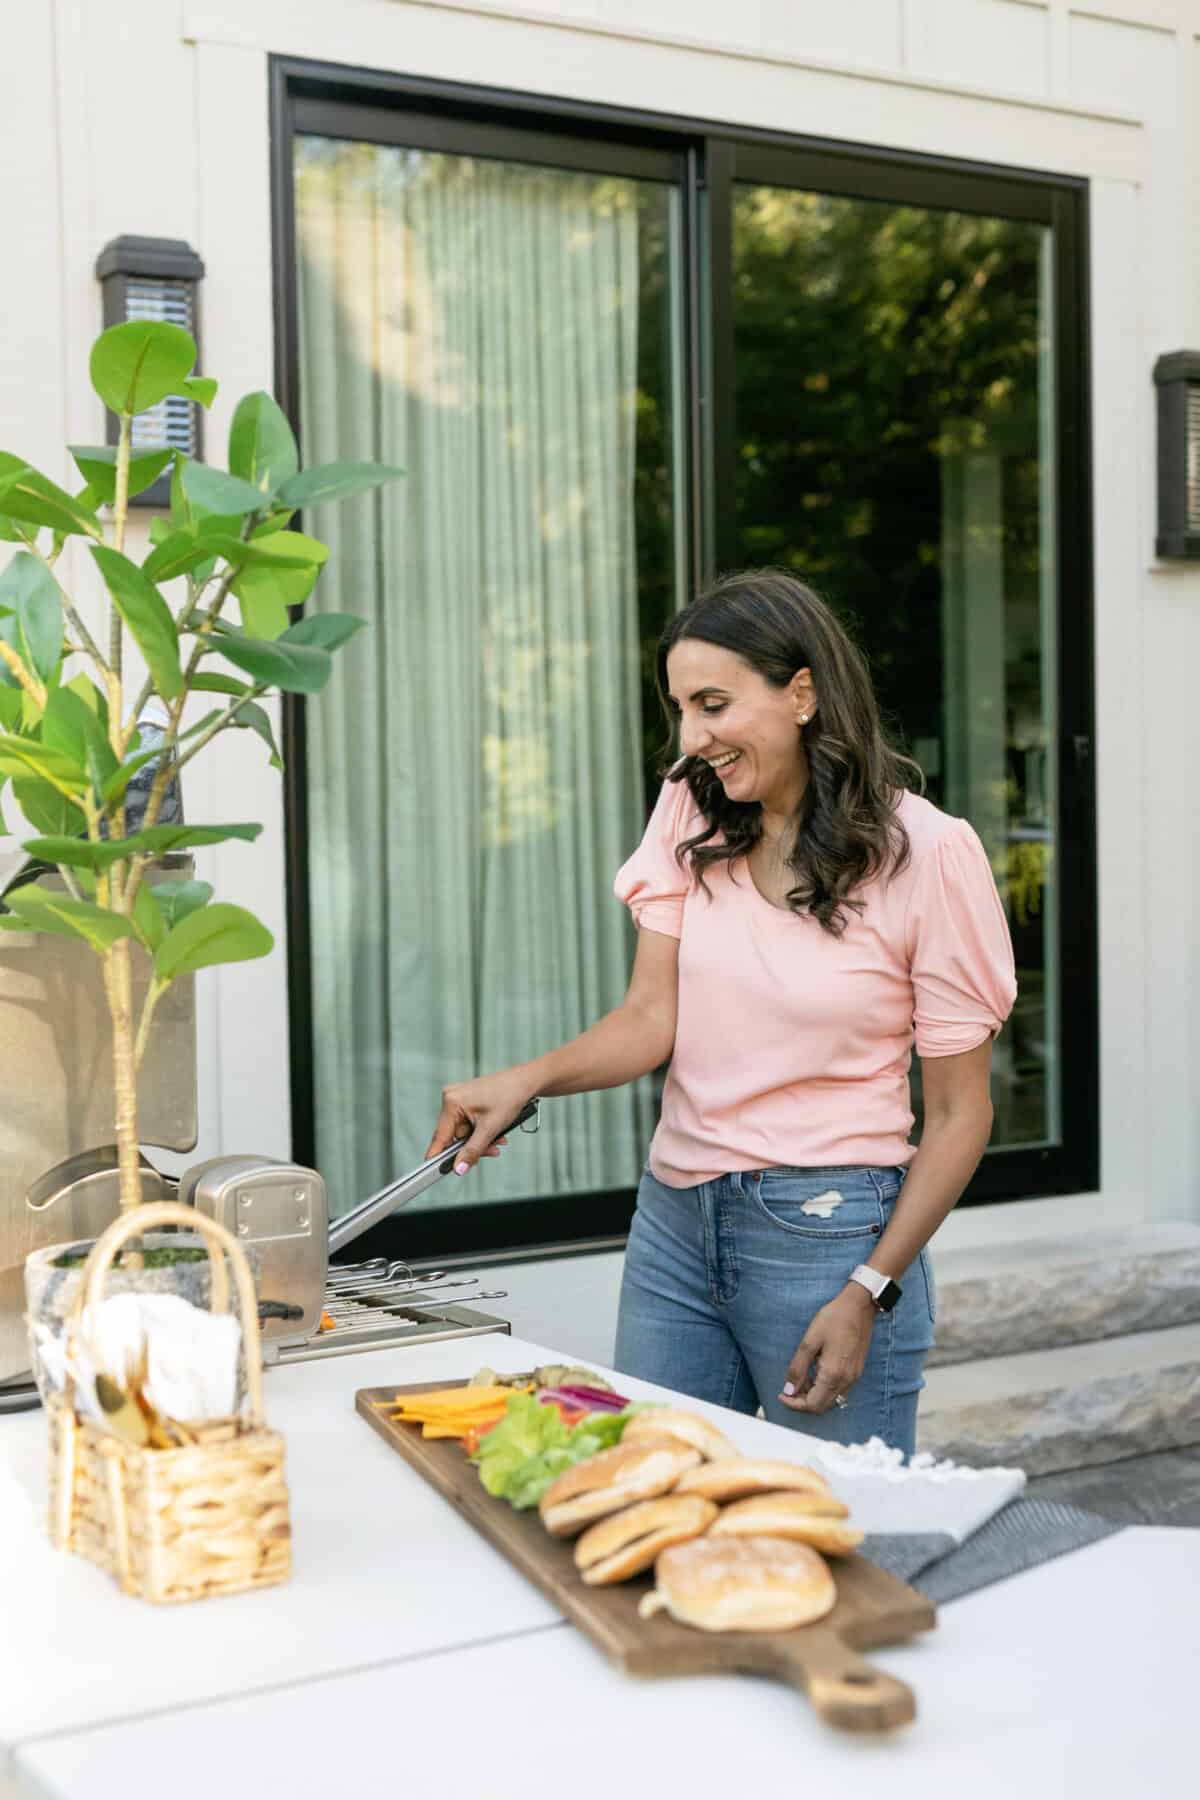 Yumna grilling outside in outdoor kitchen patio